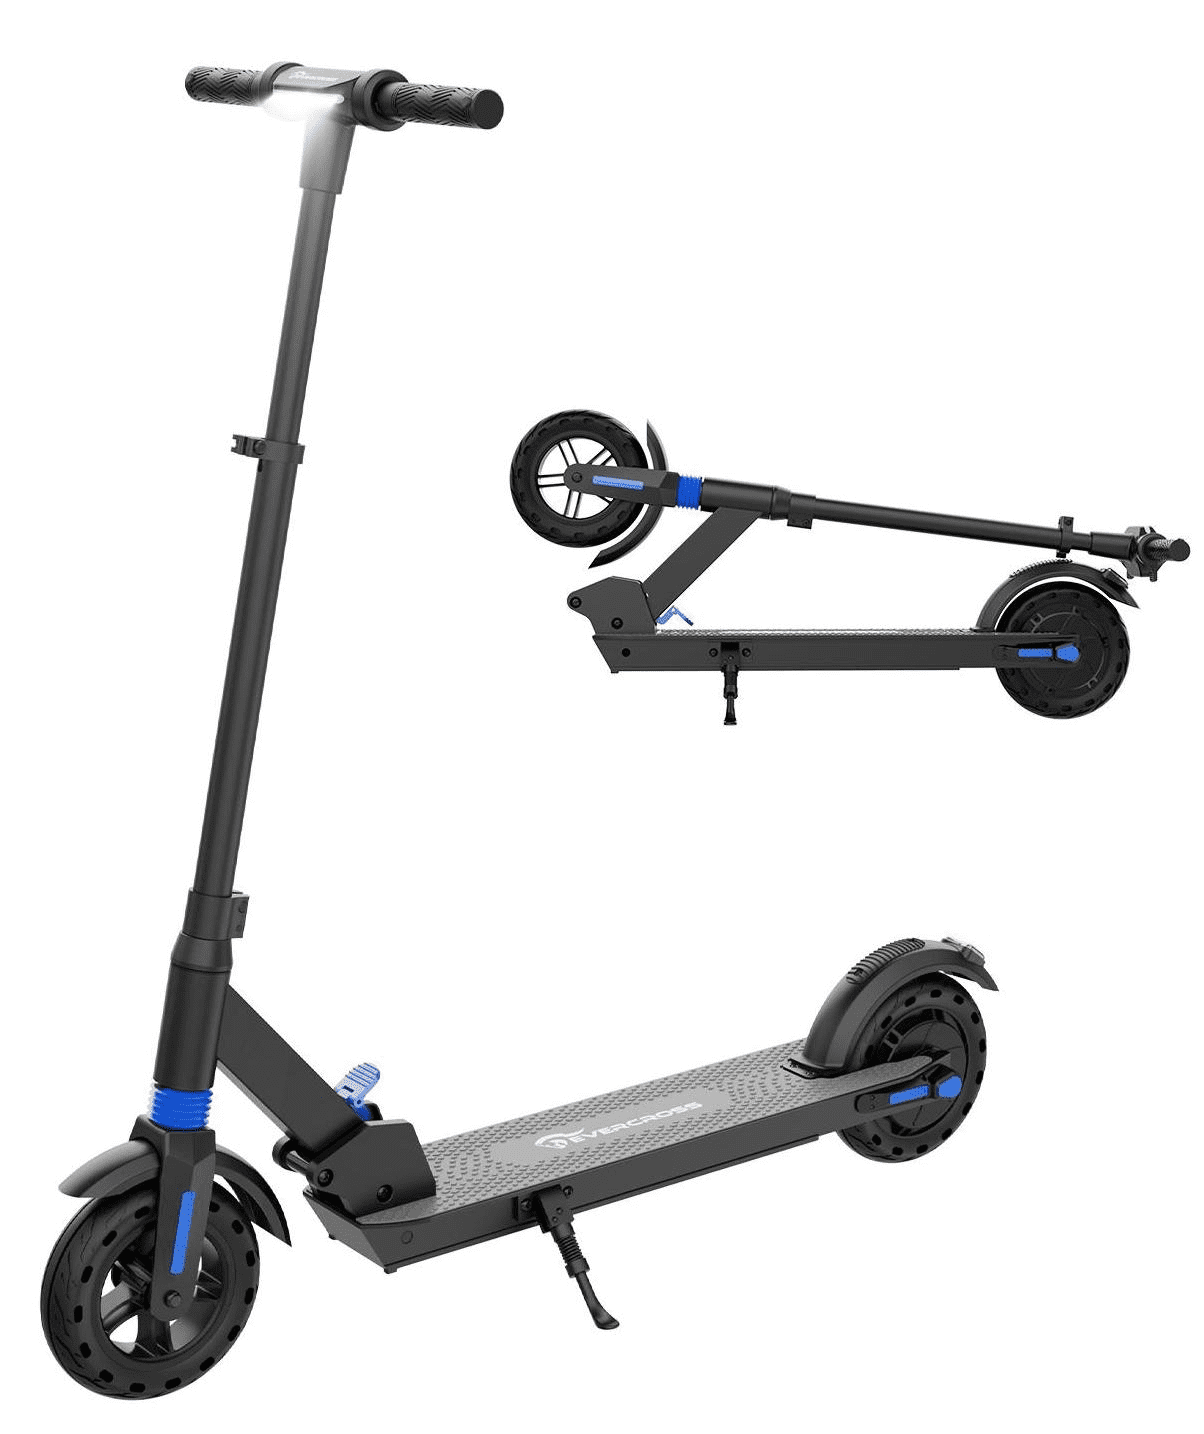 Procent Orator Moden EVERCROSS Electric Scooter - 8" Tires, 350W Motor up to 15 MPH & 12 Miles,  3 Speed Modes & Foldable - Walmart.com